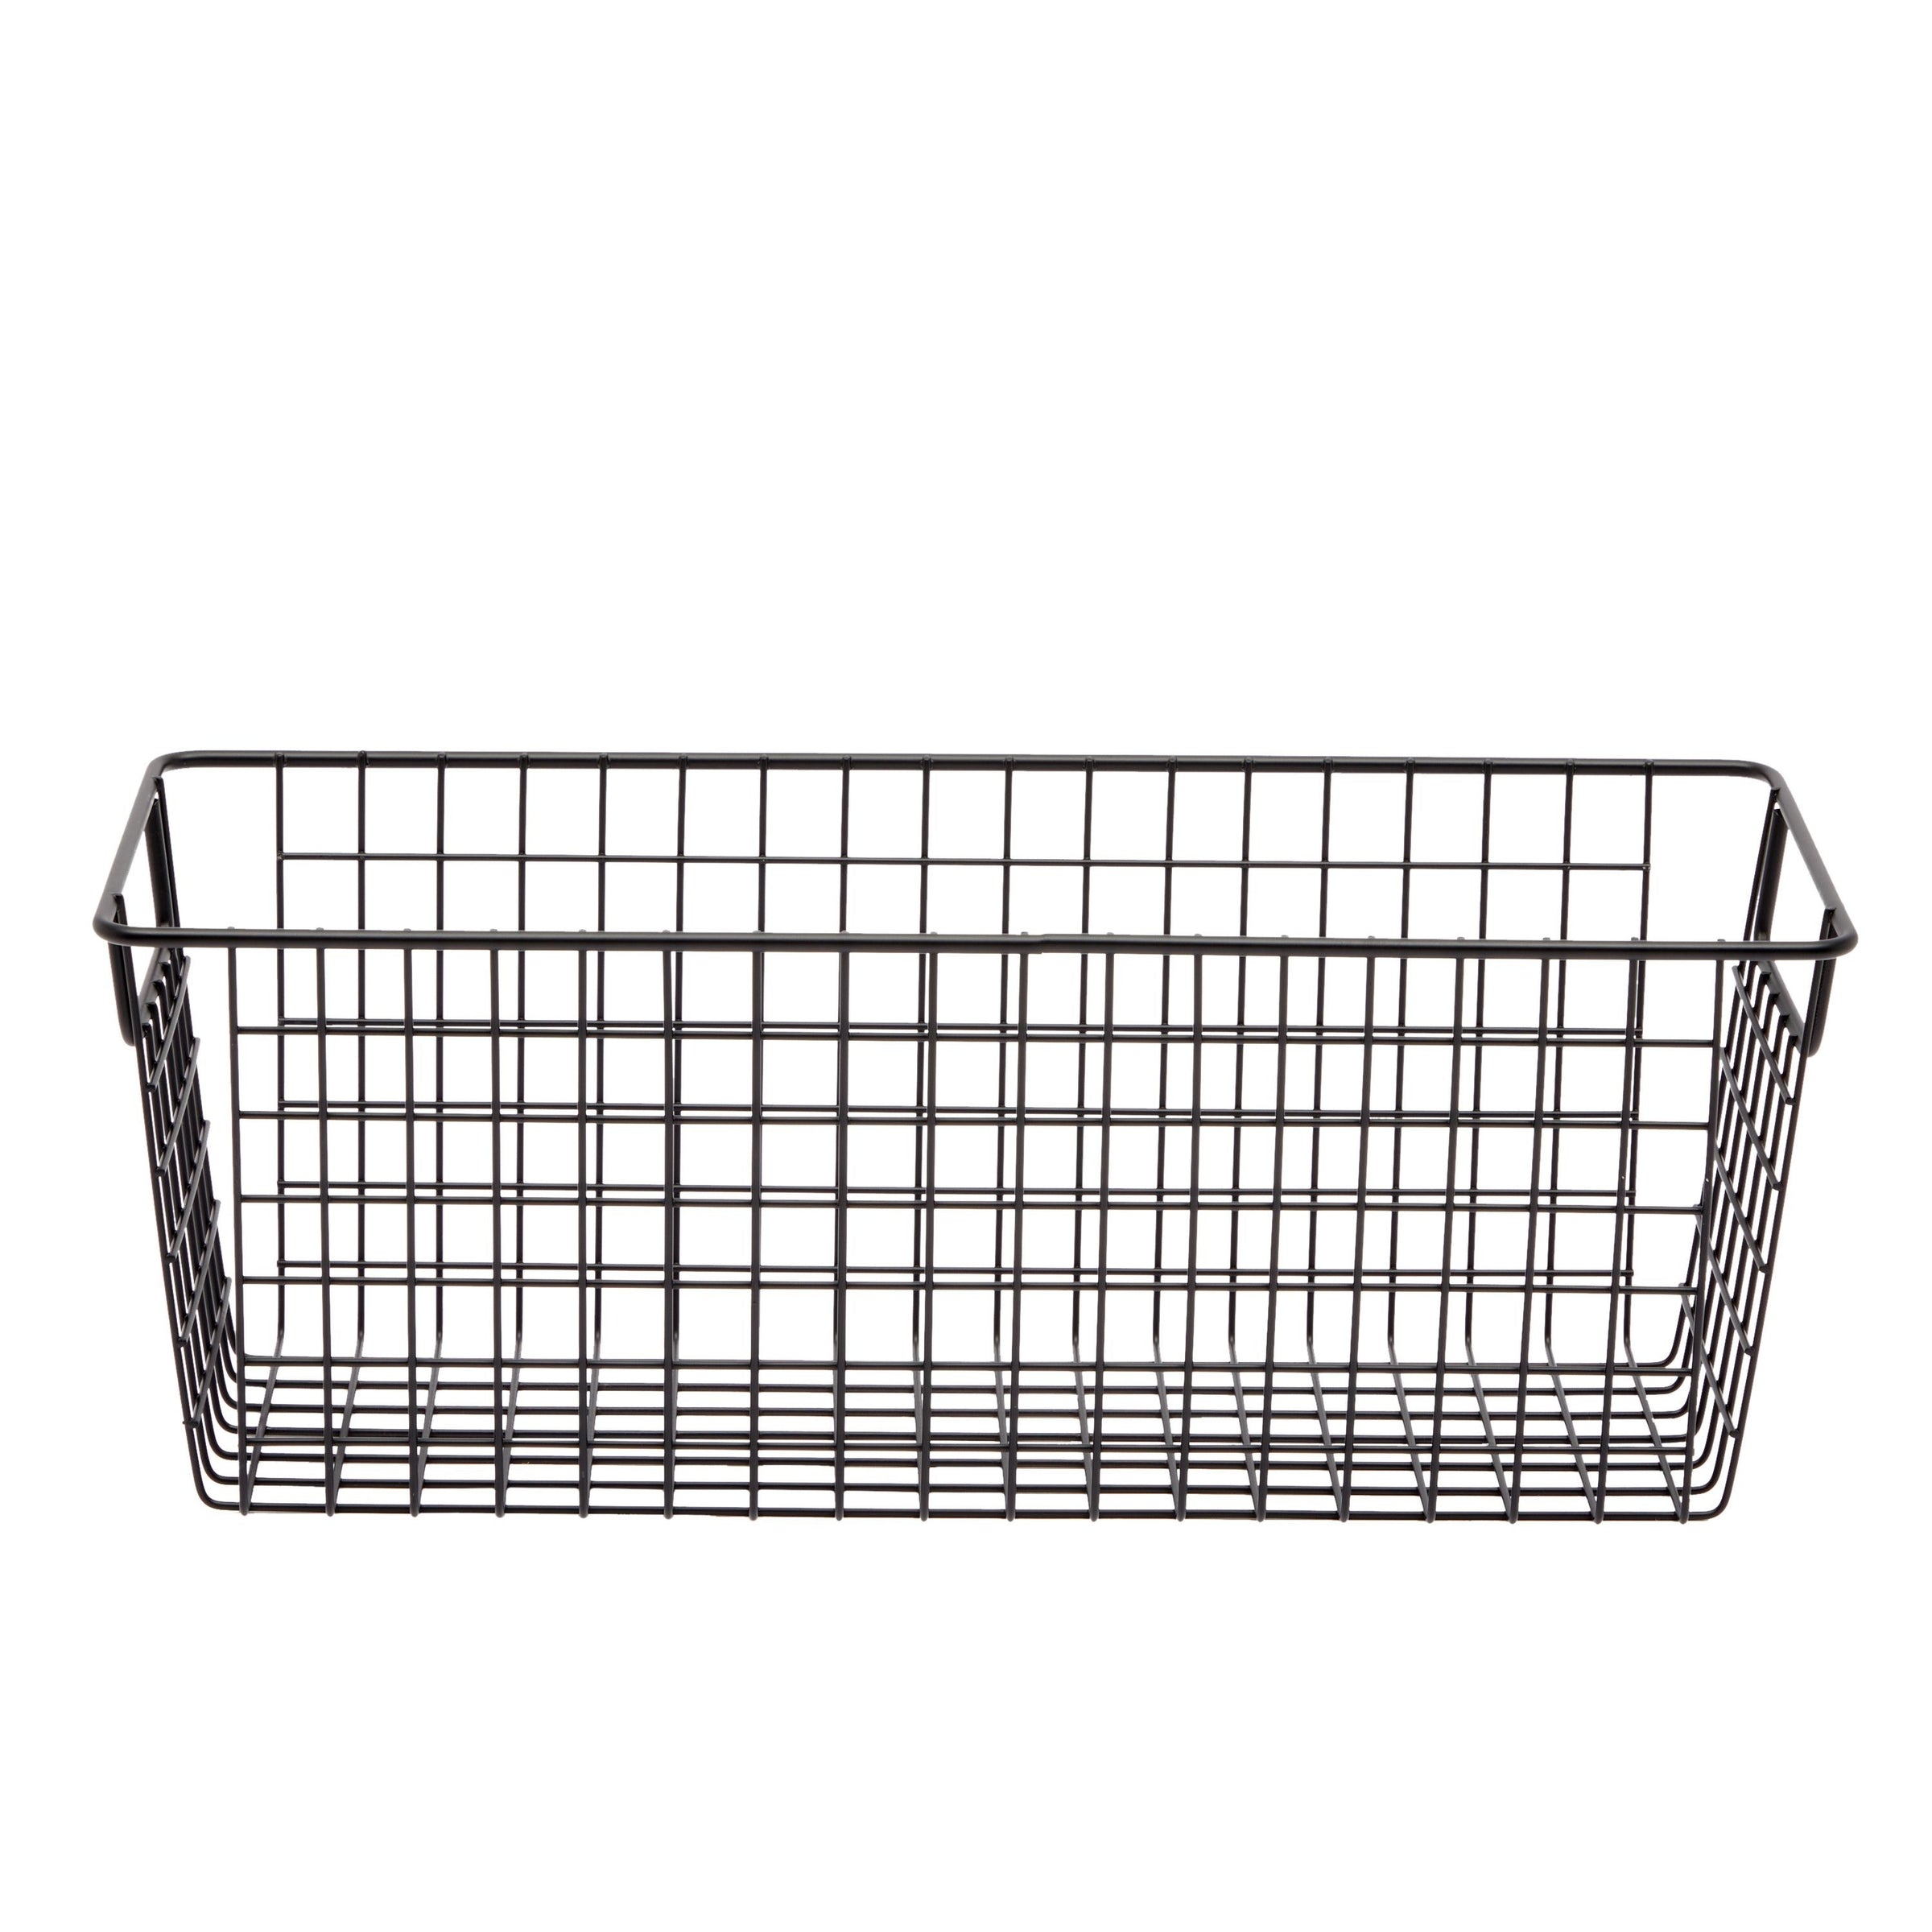 Set of 3 Black Cylinder Wire Storage Container Baskets with Handles 20